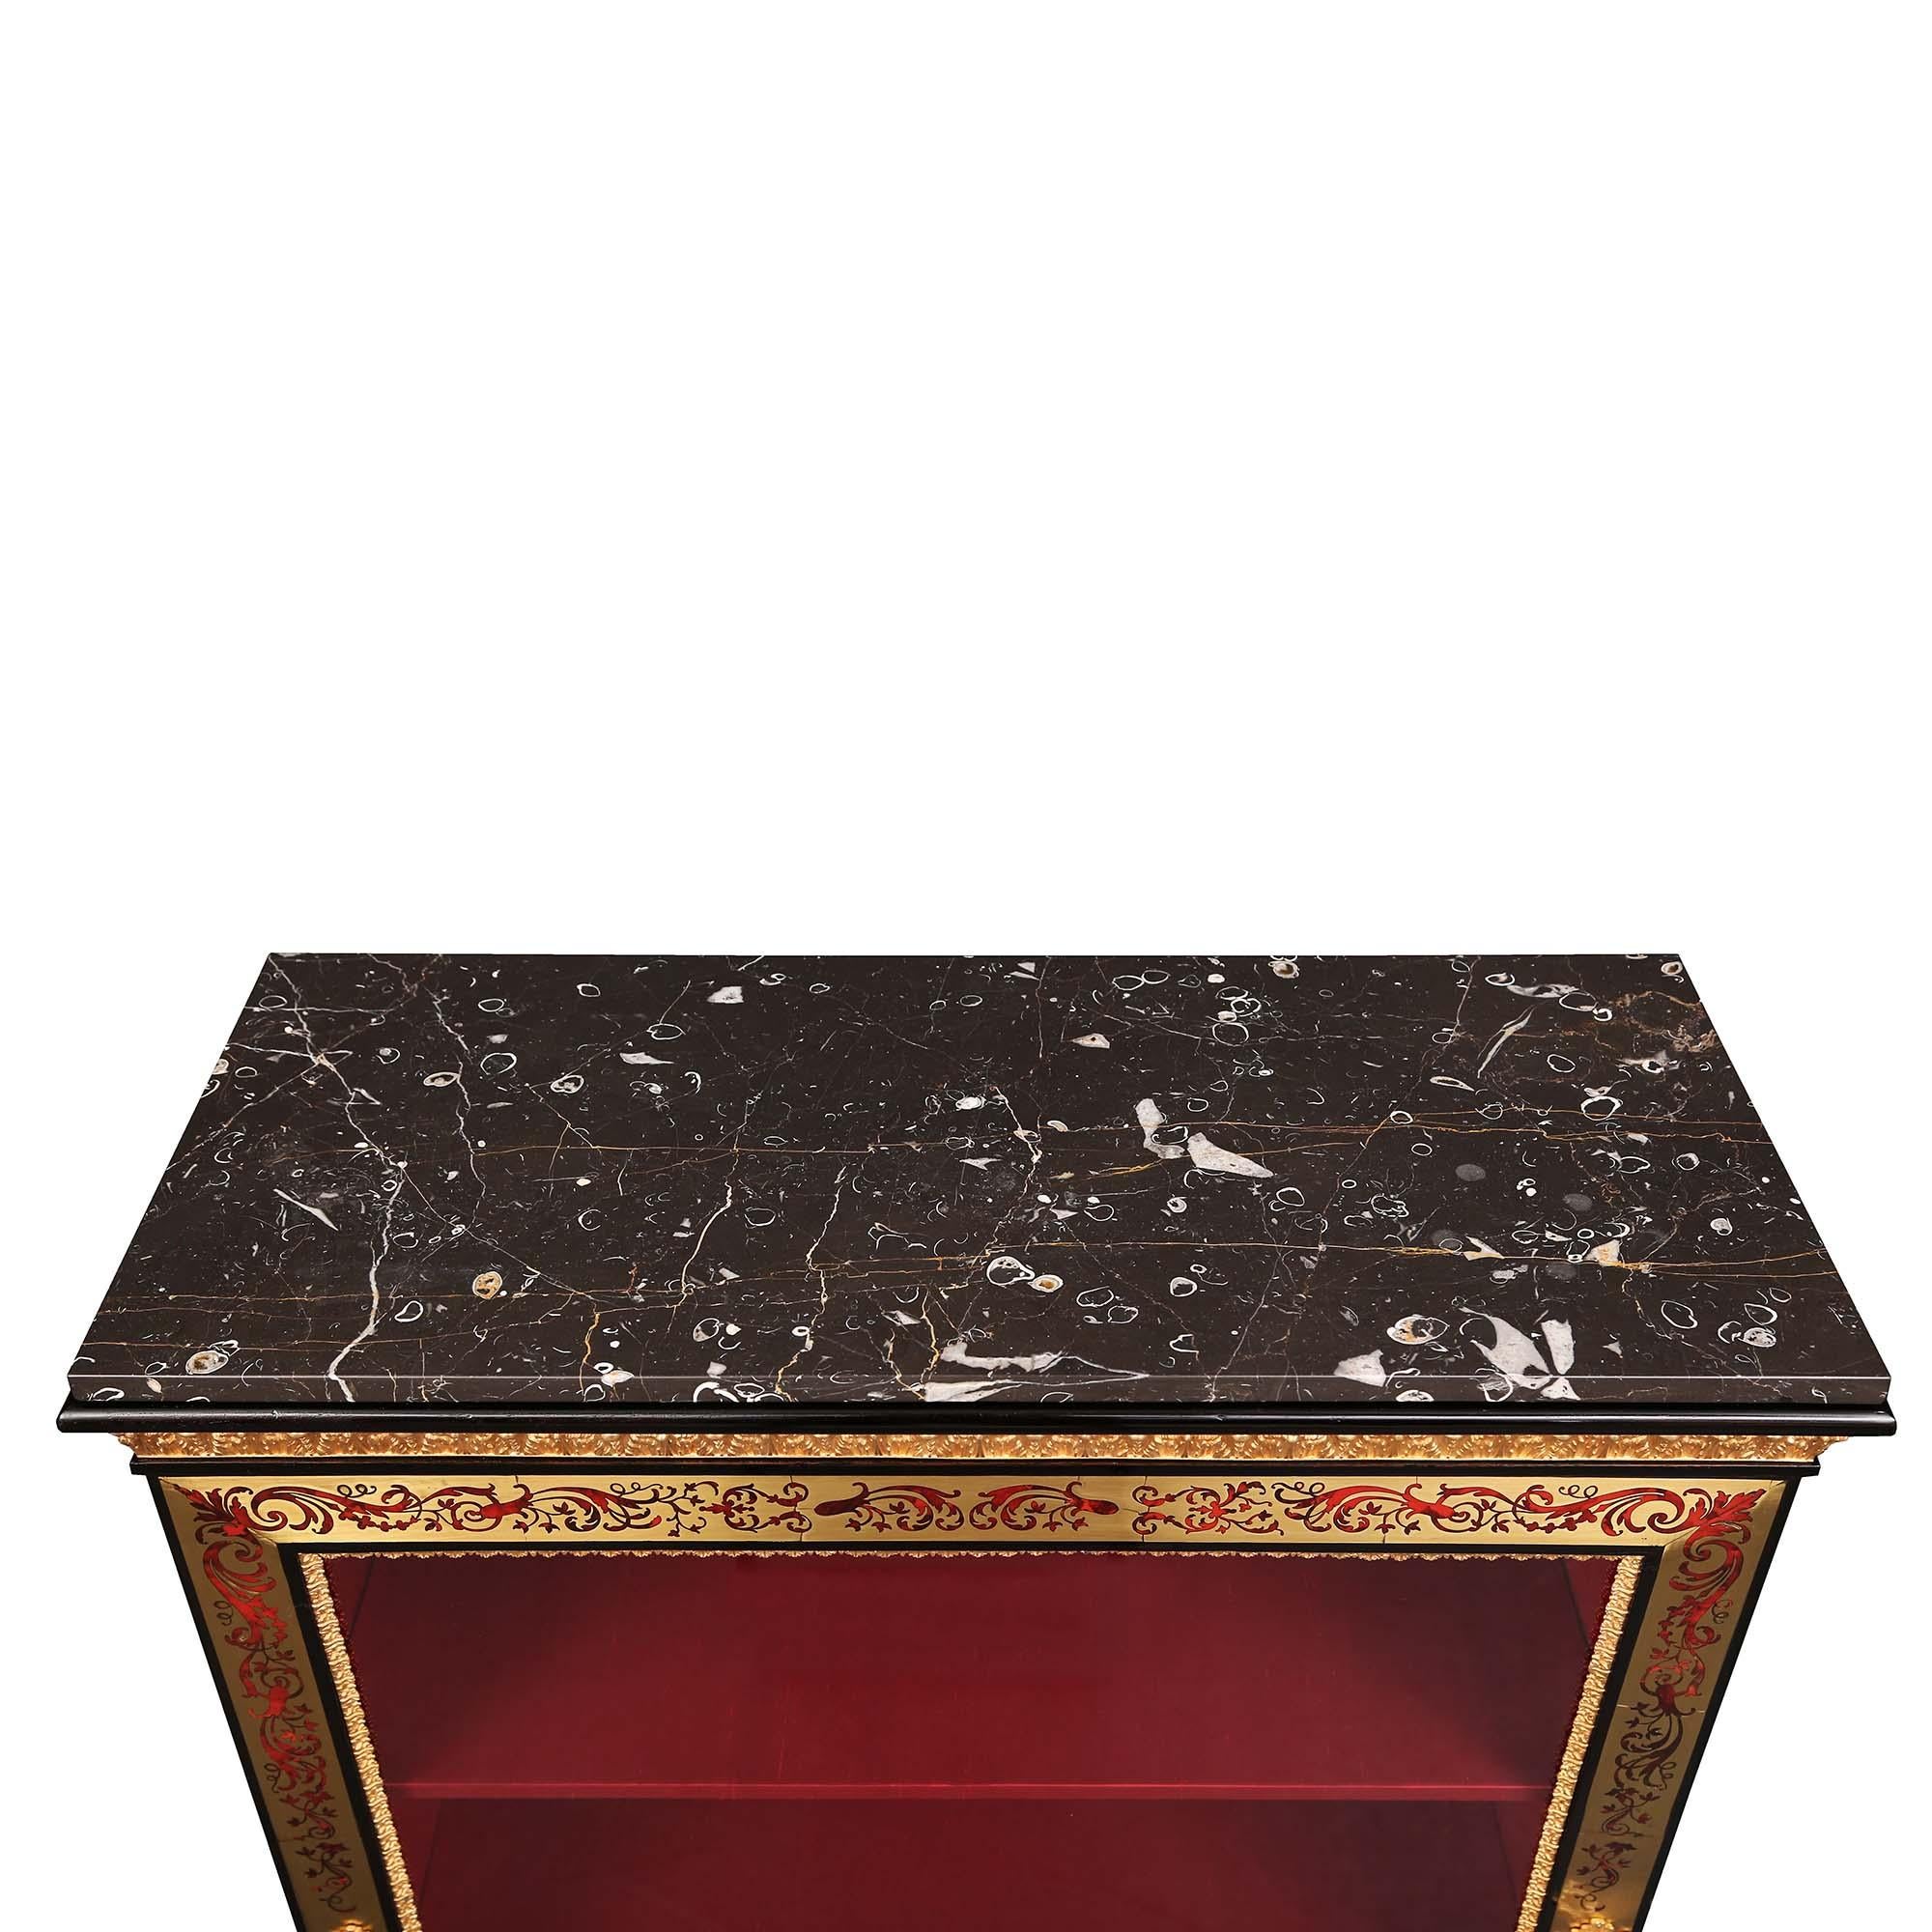 A superb French 19th century Louis XVI style Napoleon III Period Boulle cabinet vitrine. The ebony cabinet is raised on a scroll carved base, with an ormolu top border, centered by a finely chased ormolu winged mask amidst scrolled acanthus leaves